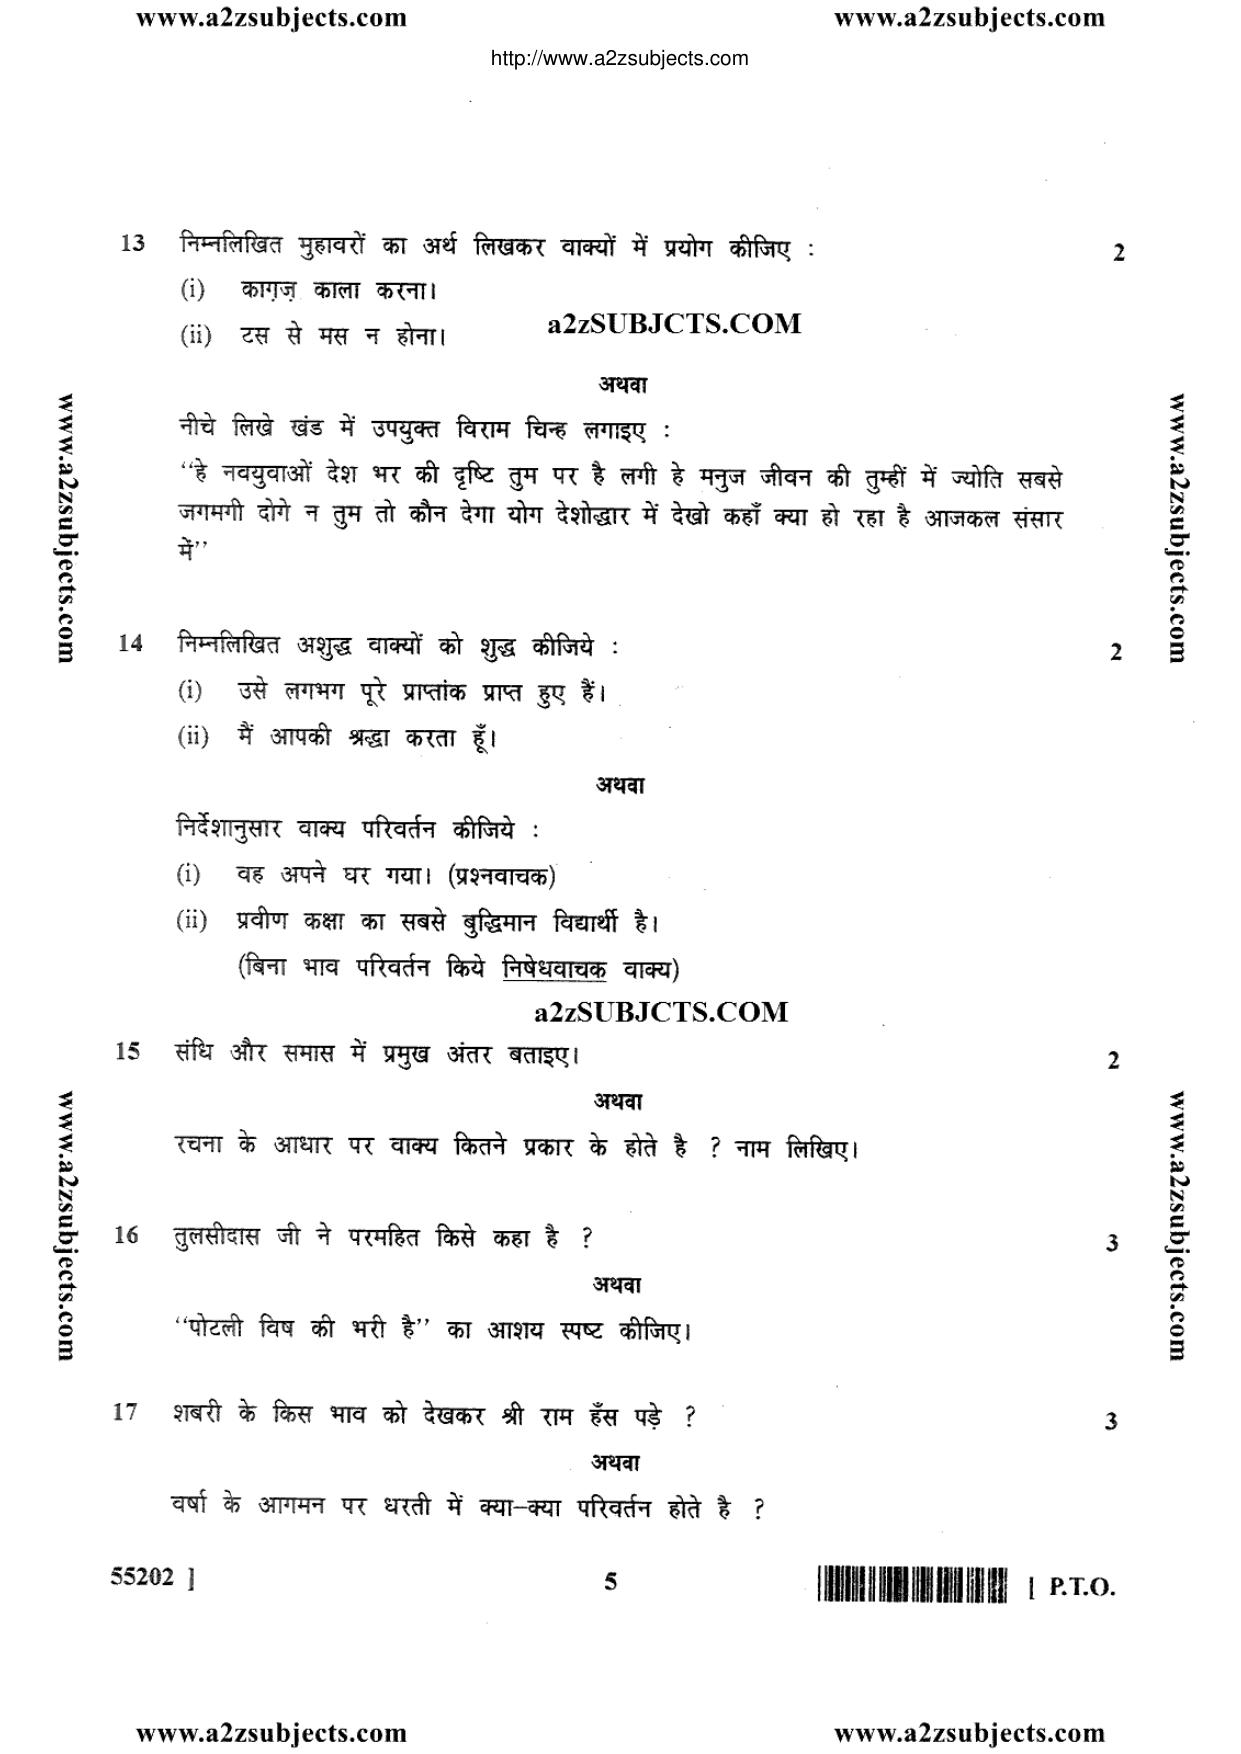 MP Board Class 10 Marathi 2017 Question Paper - Page 5